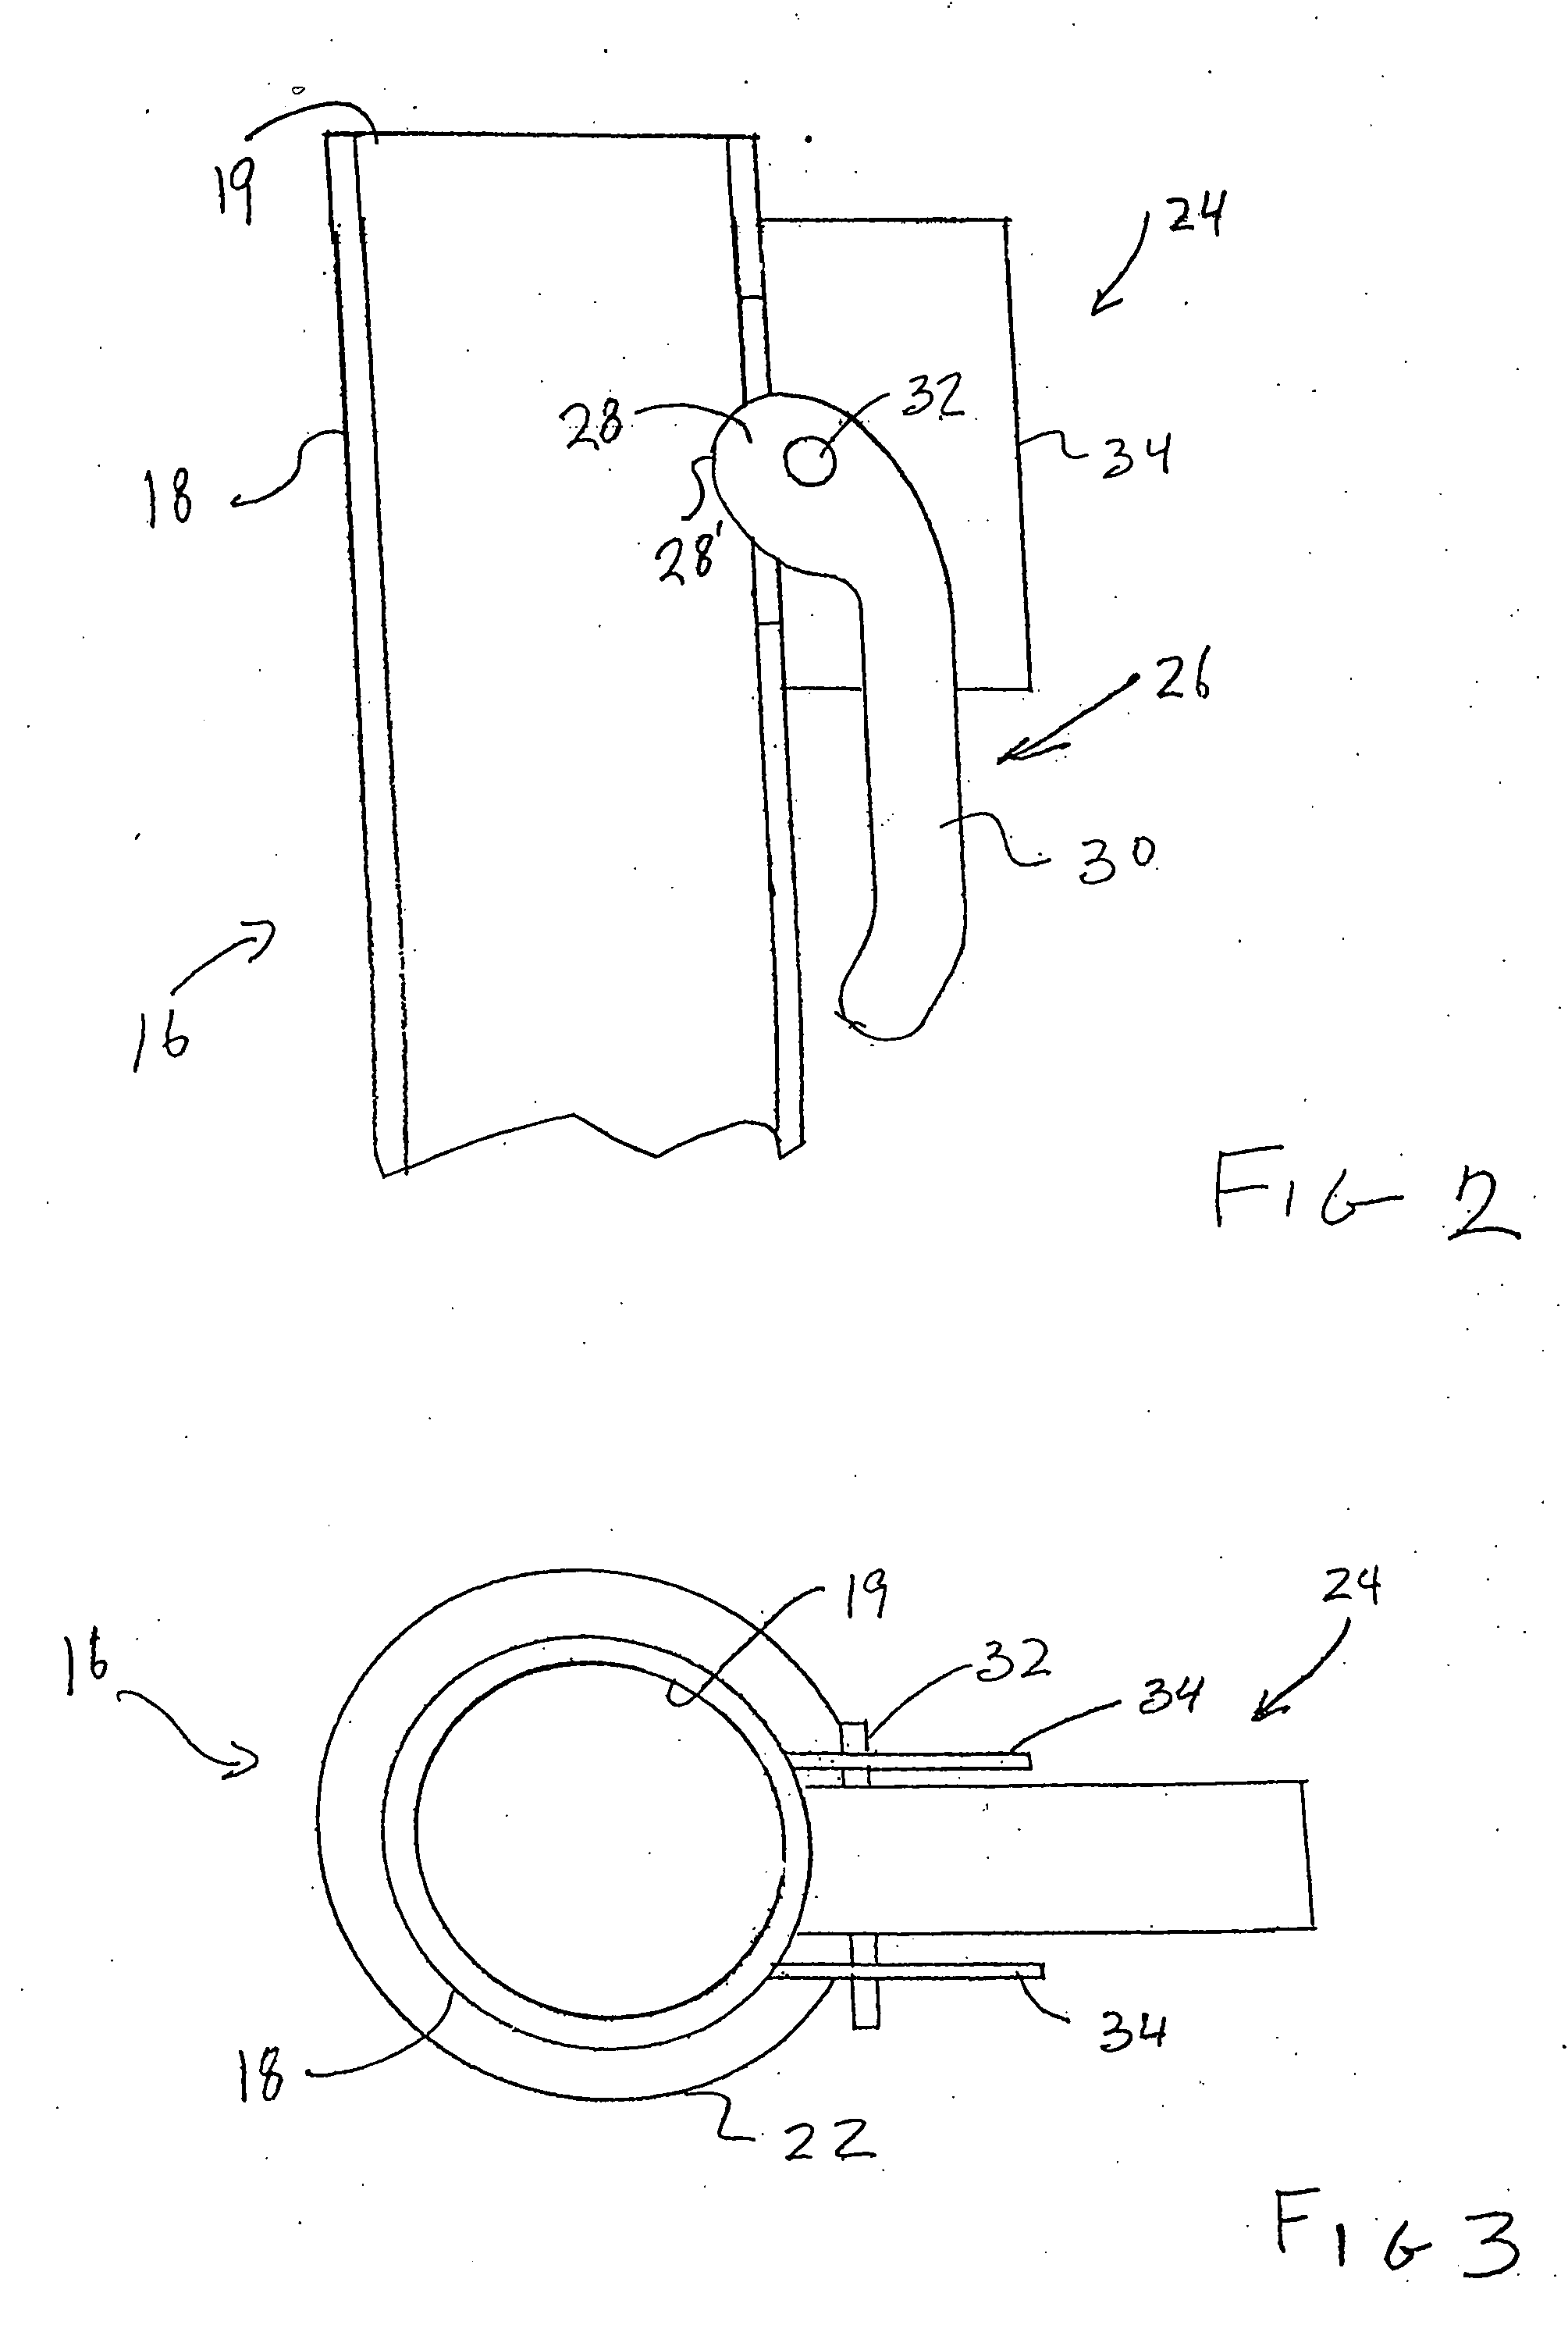 Locking assembly for stanchion